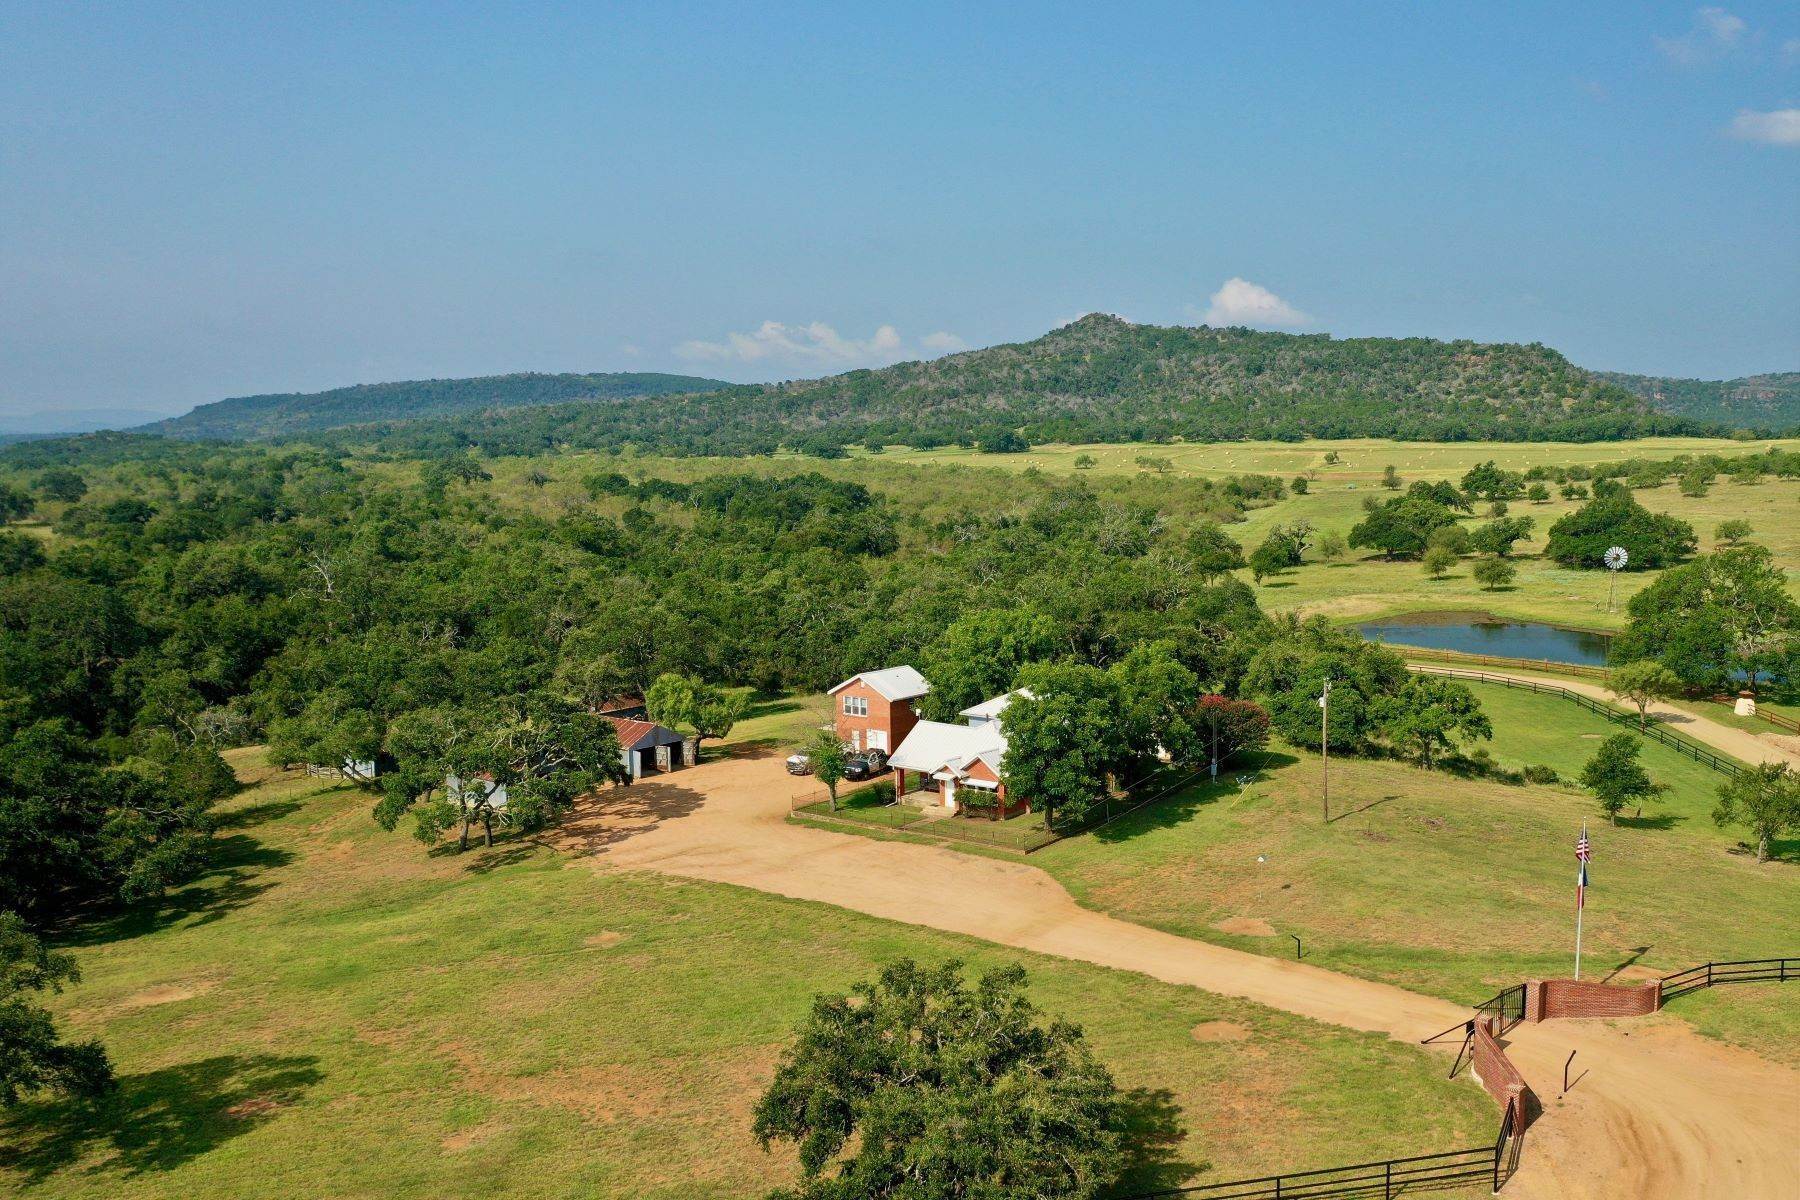 Property for Sale at 1,116+/- Acres Barnett Branch Ranch, Llano Co., Llano , TX 78643 1,116+/- Acres Barnett Branch Ranch, Llano Co. Llano, Texas 78643 United States